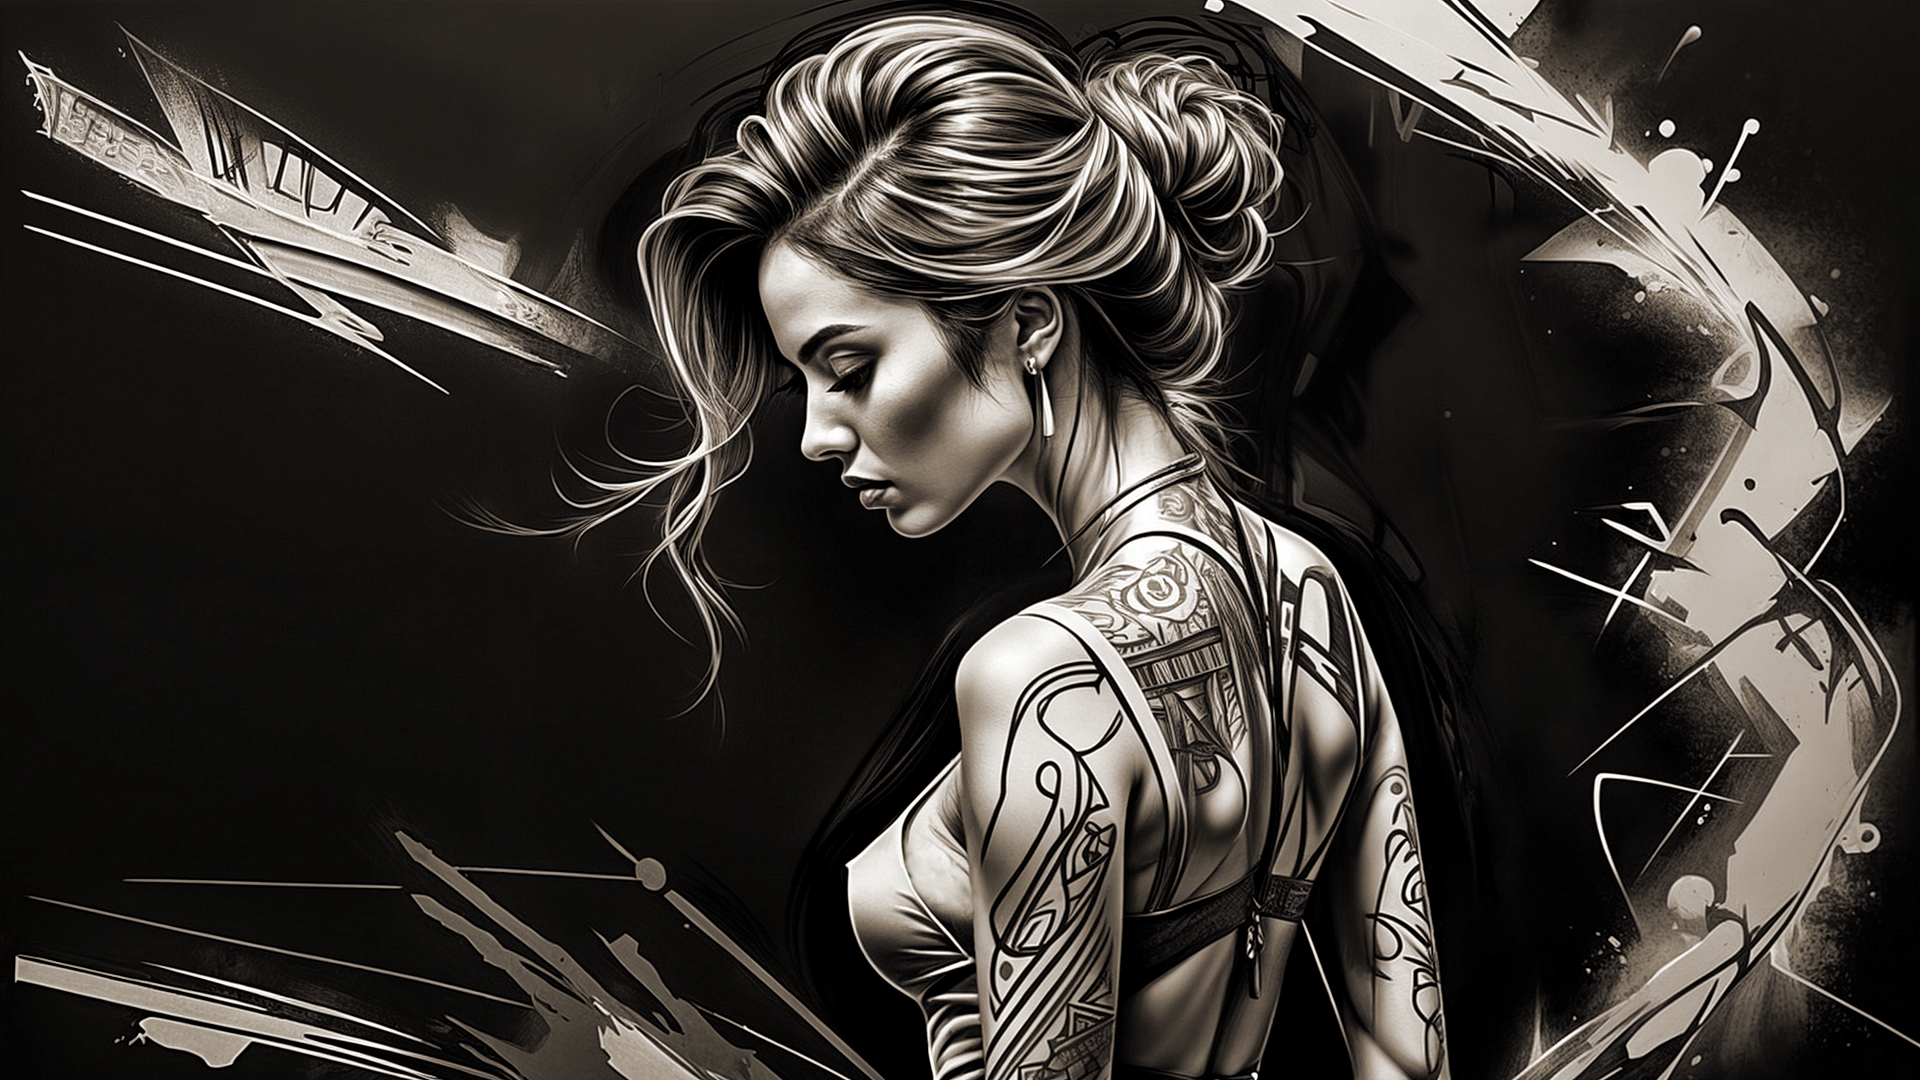 A drawing of a girl with a tattoo on her back